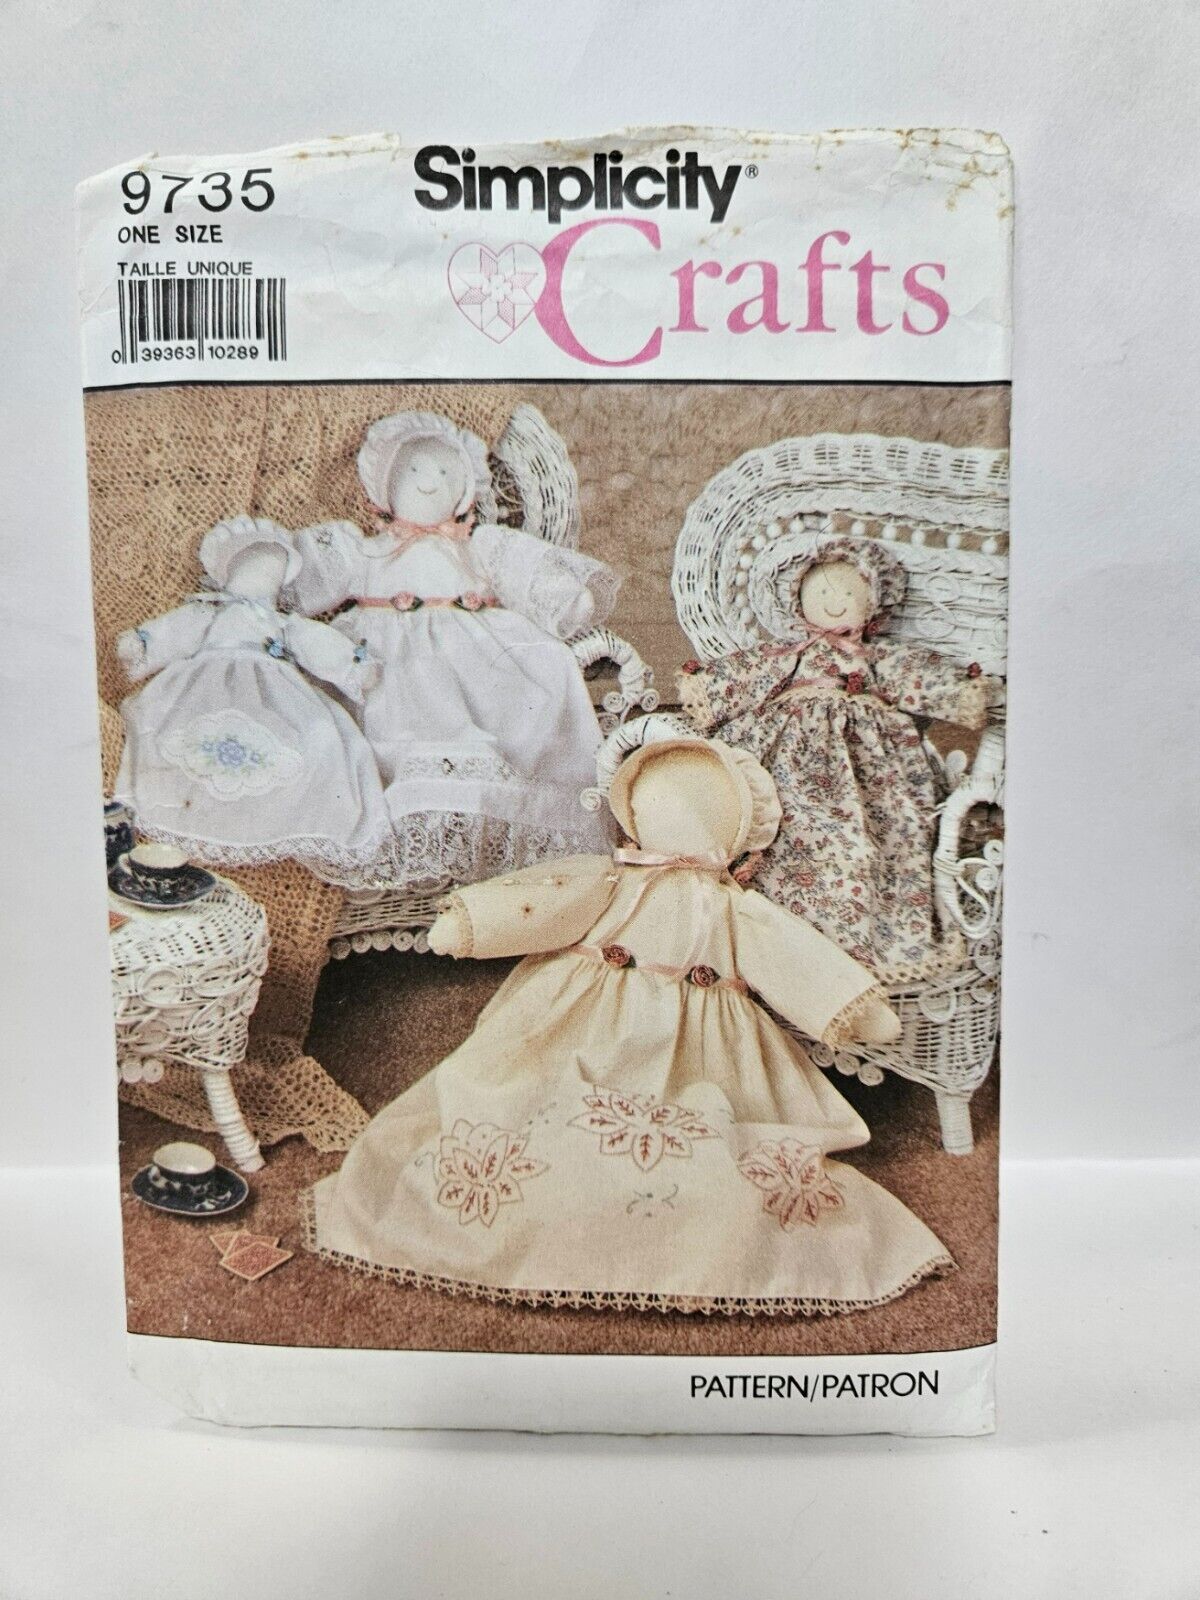 Simplicity Crafts 9735 Heirloom Doll and Clothes Cut Complete 1990